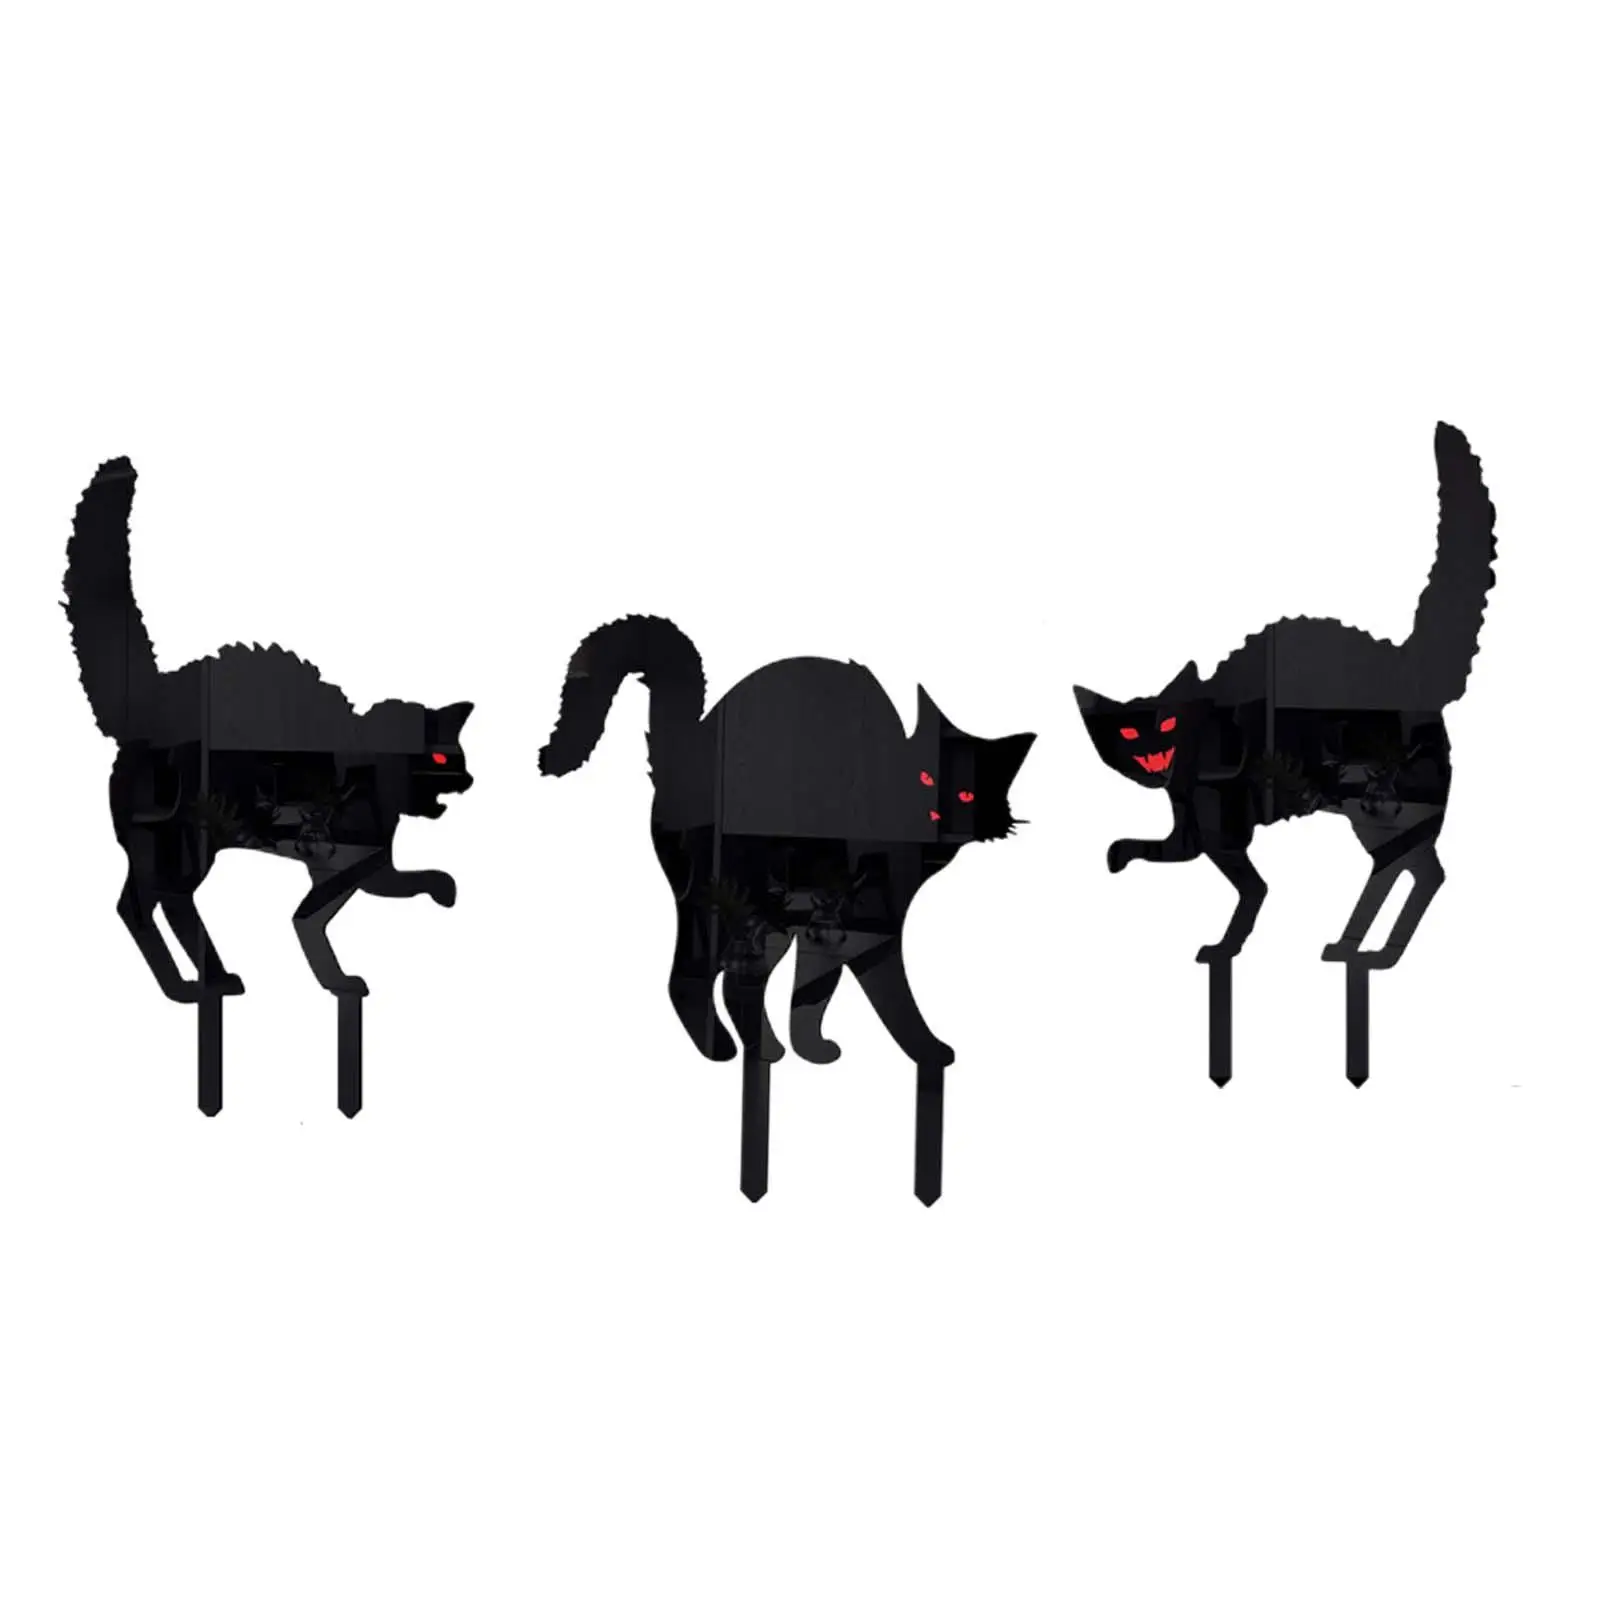 3 Pieces Black Cat Statue Stakes Halloween Realistic for Lawn Fish Pond Yard